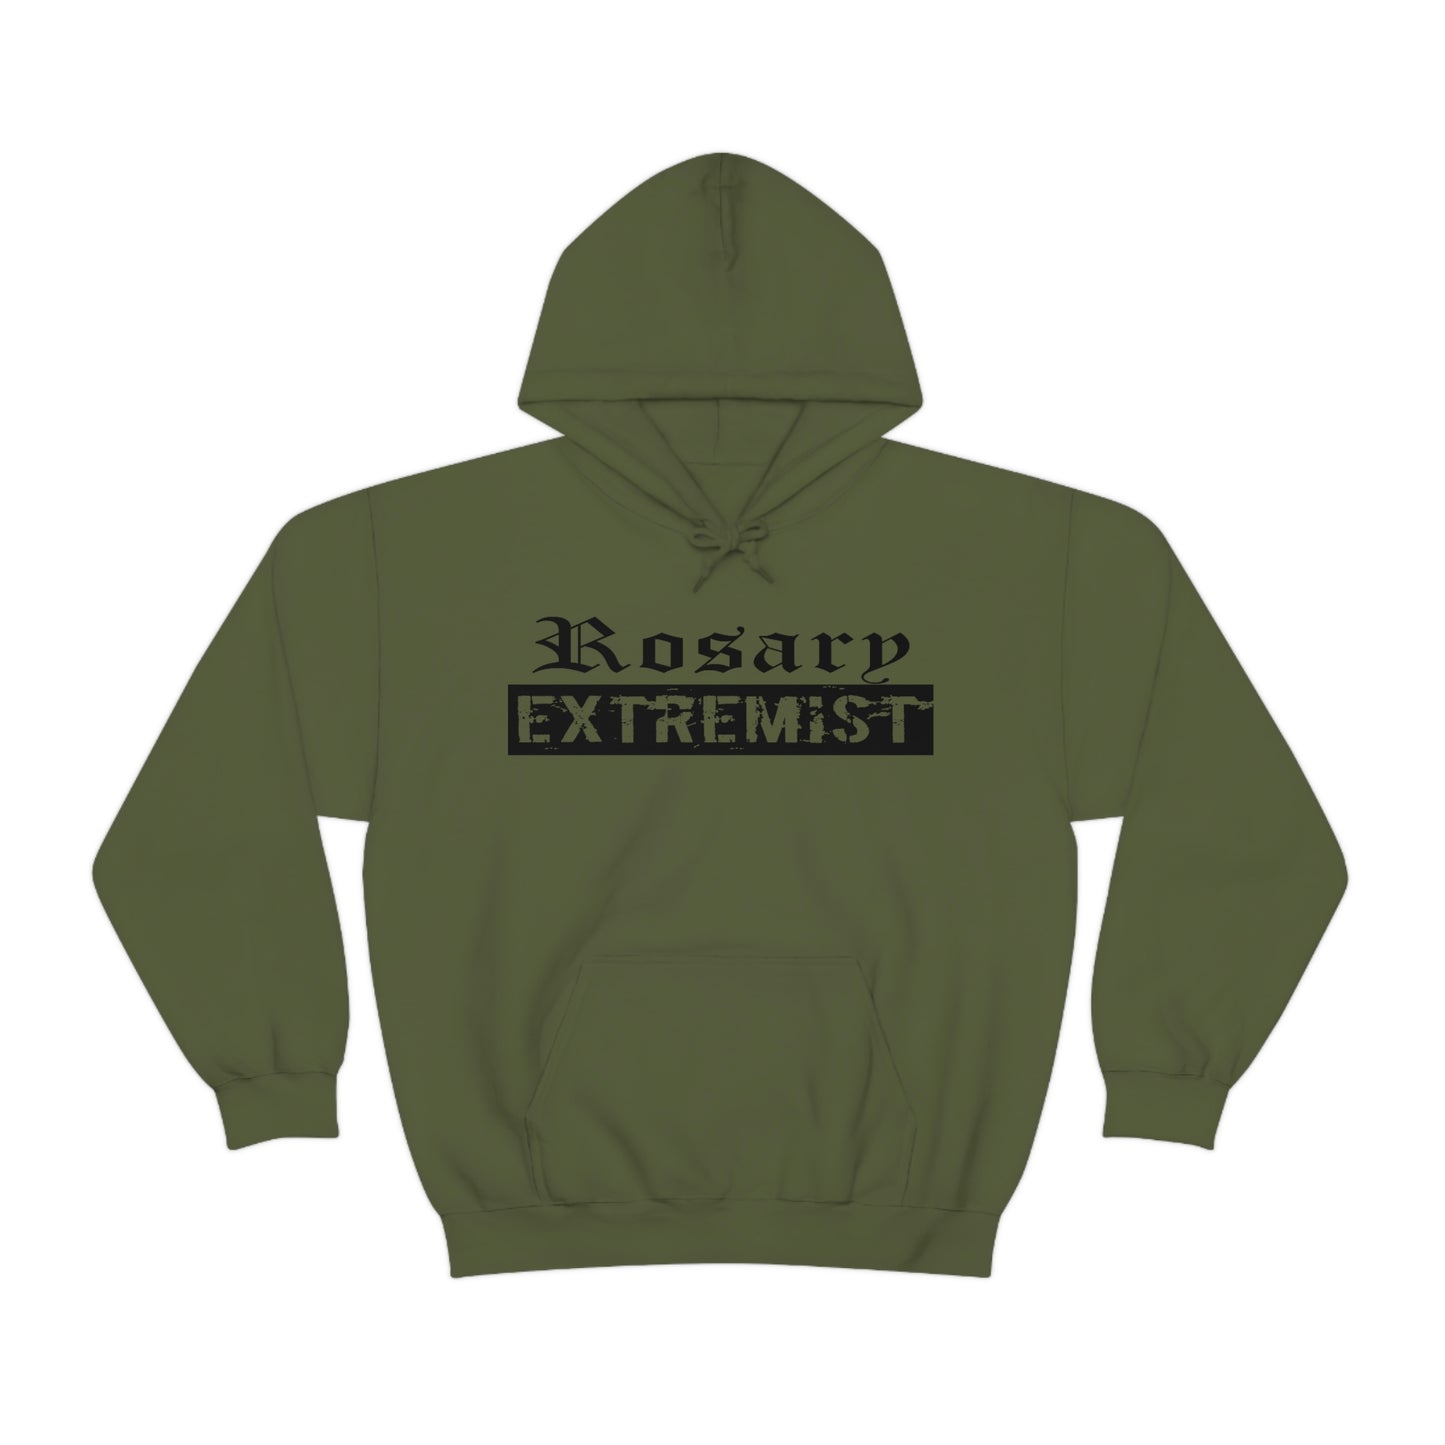 Olive Green Gildan Hoodie with black "Rosary Extremist" text printed on it by Sanctus Servo.